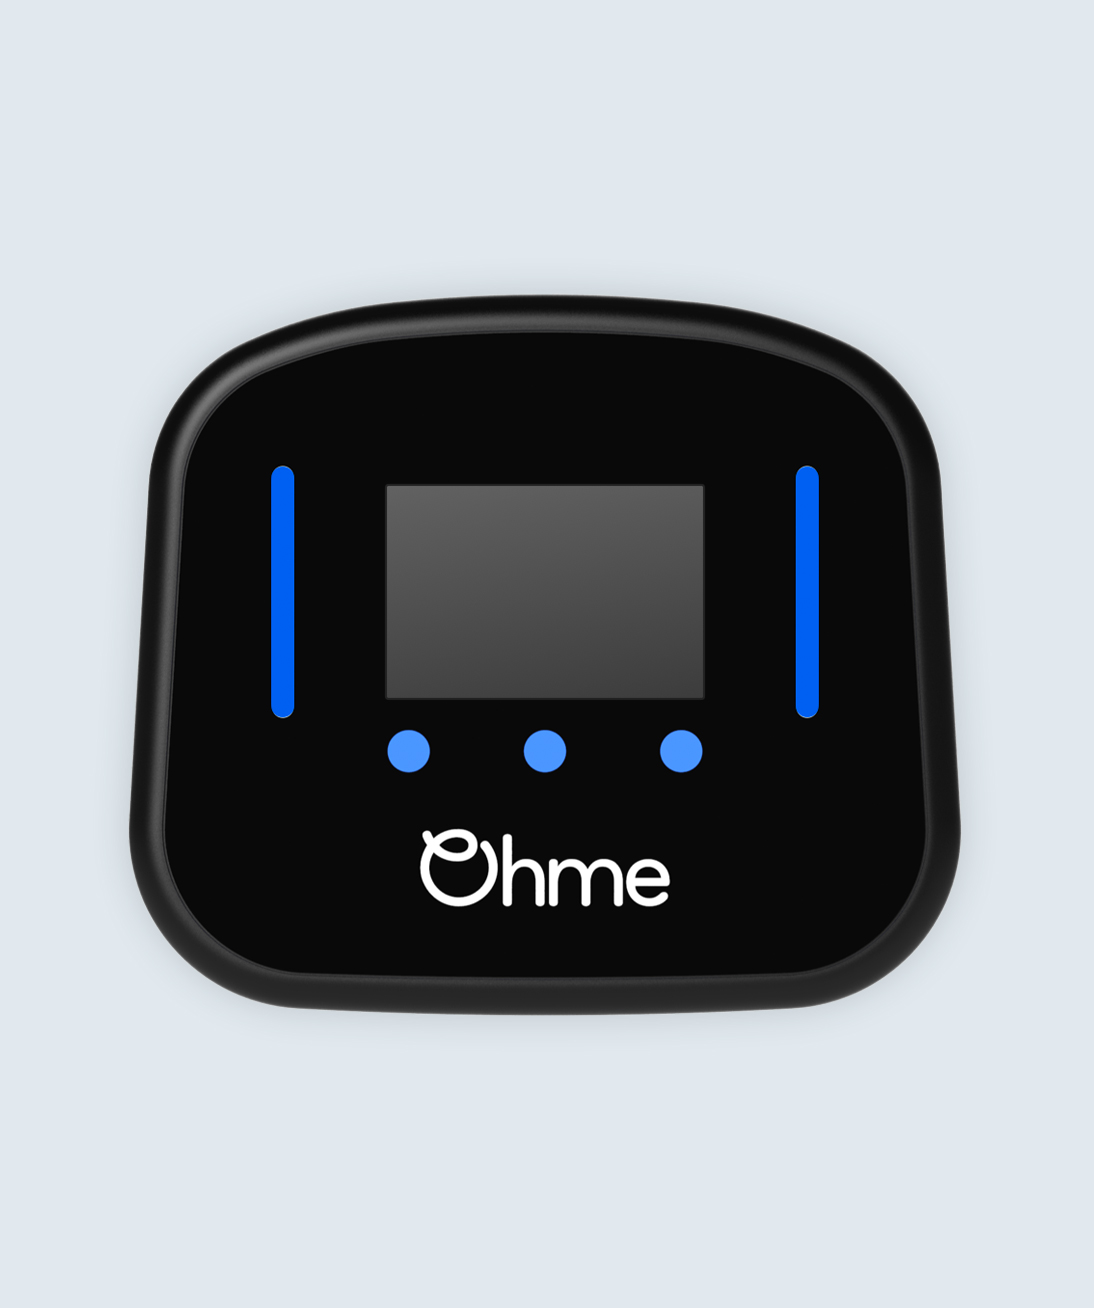 Ohme home pro with blue lights illuminated